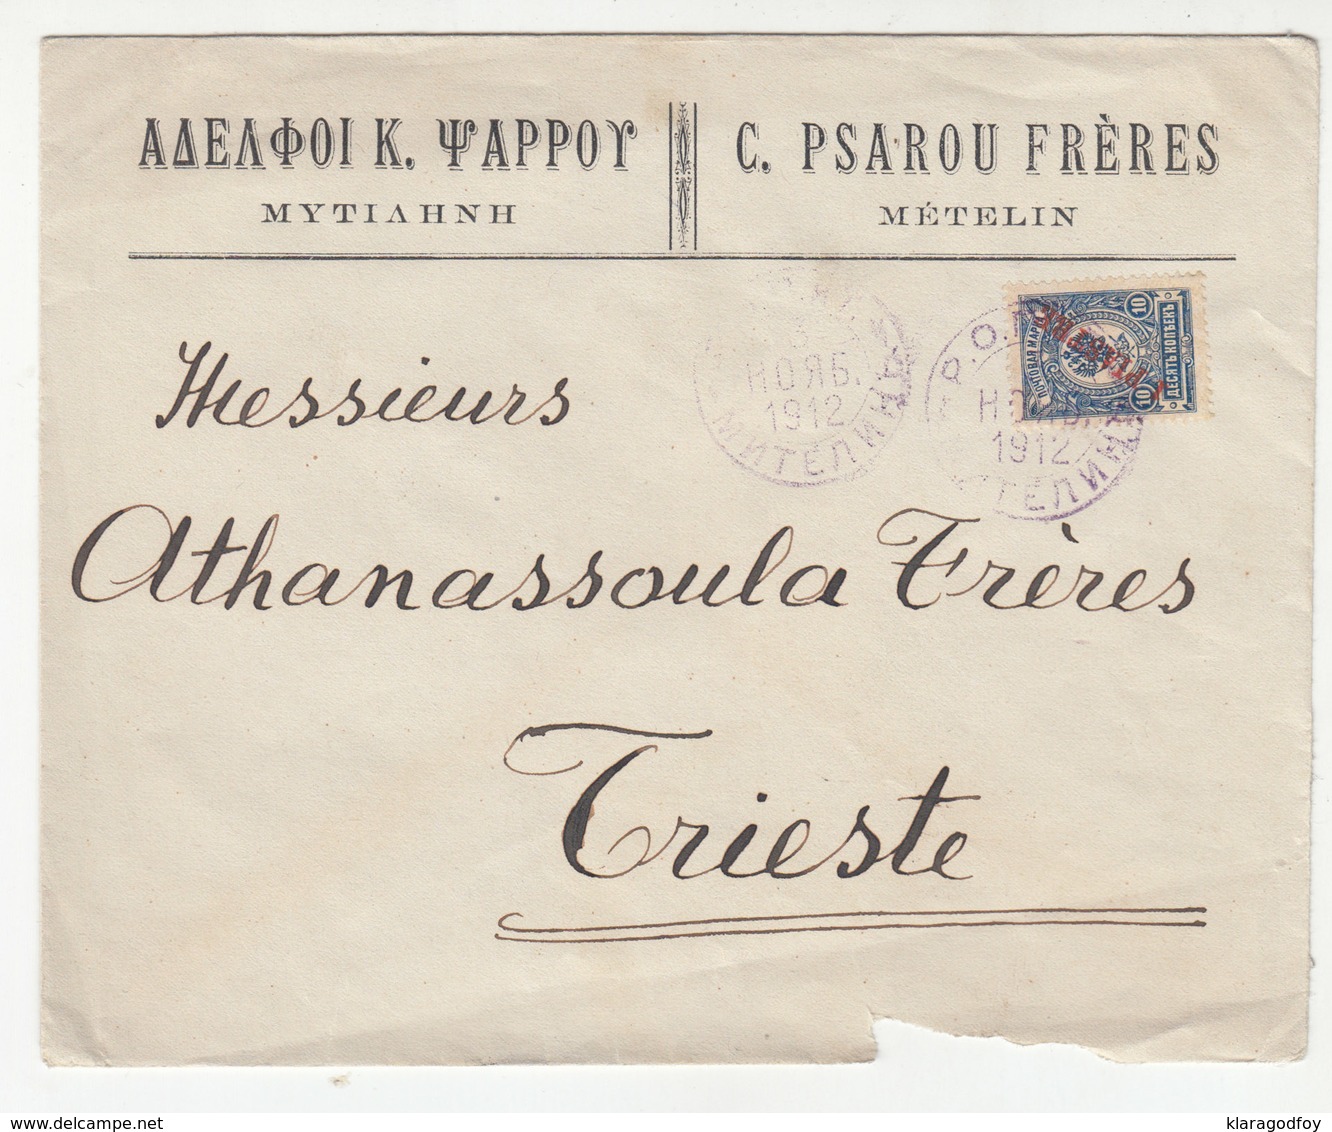 Russia R.O.P.i.T. Levant C. Psarou Freres Mételin Company Letter Cover Travelled 1912 To Trieste B190615 - Turkish Empire